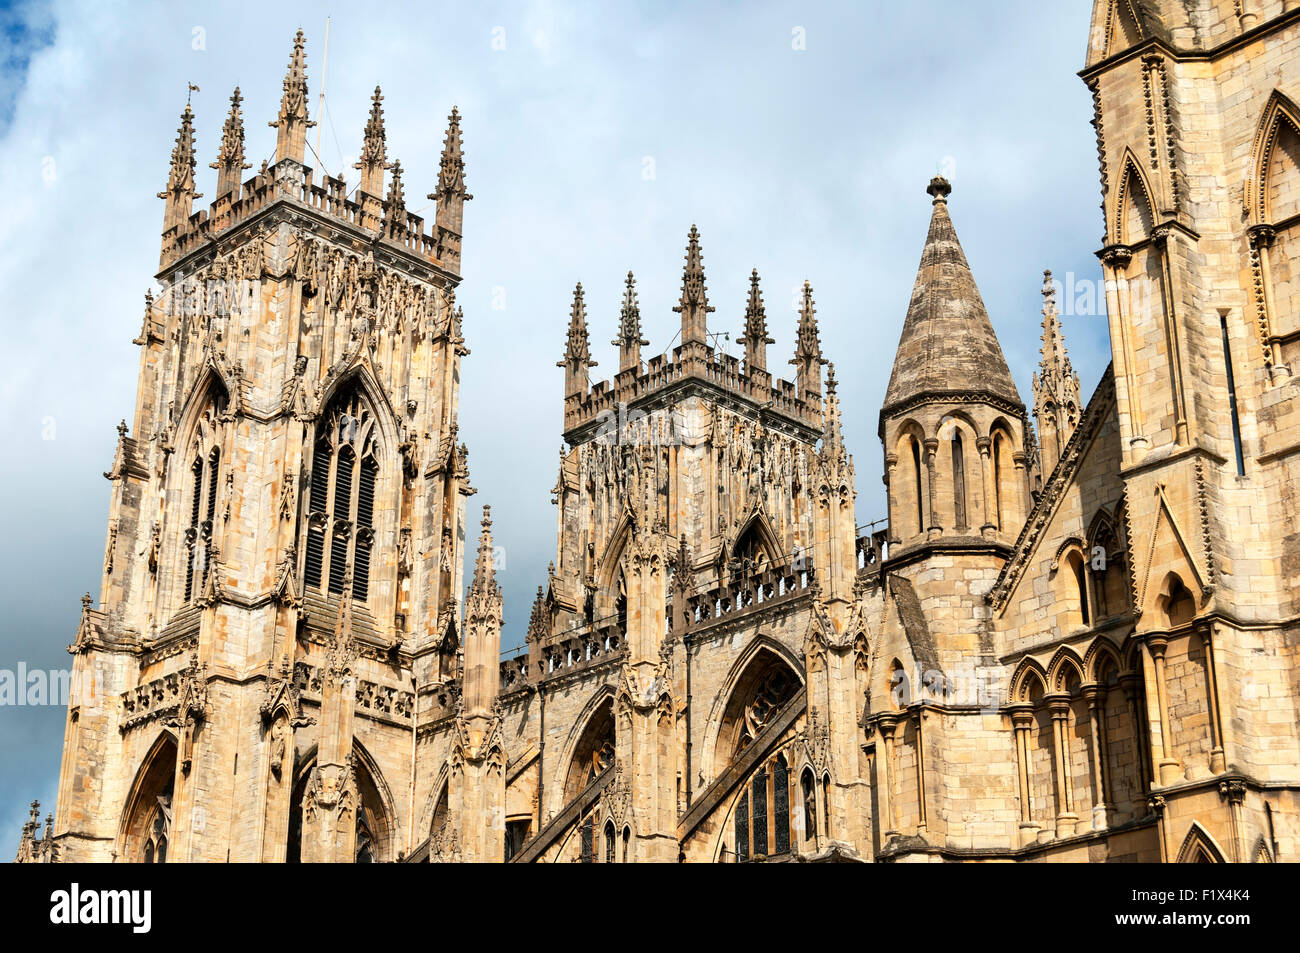 The west towers of York Minster from Minster Yard, City of York, Yorkshire, England, UK Stock Photo